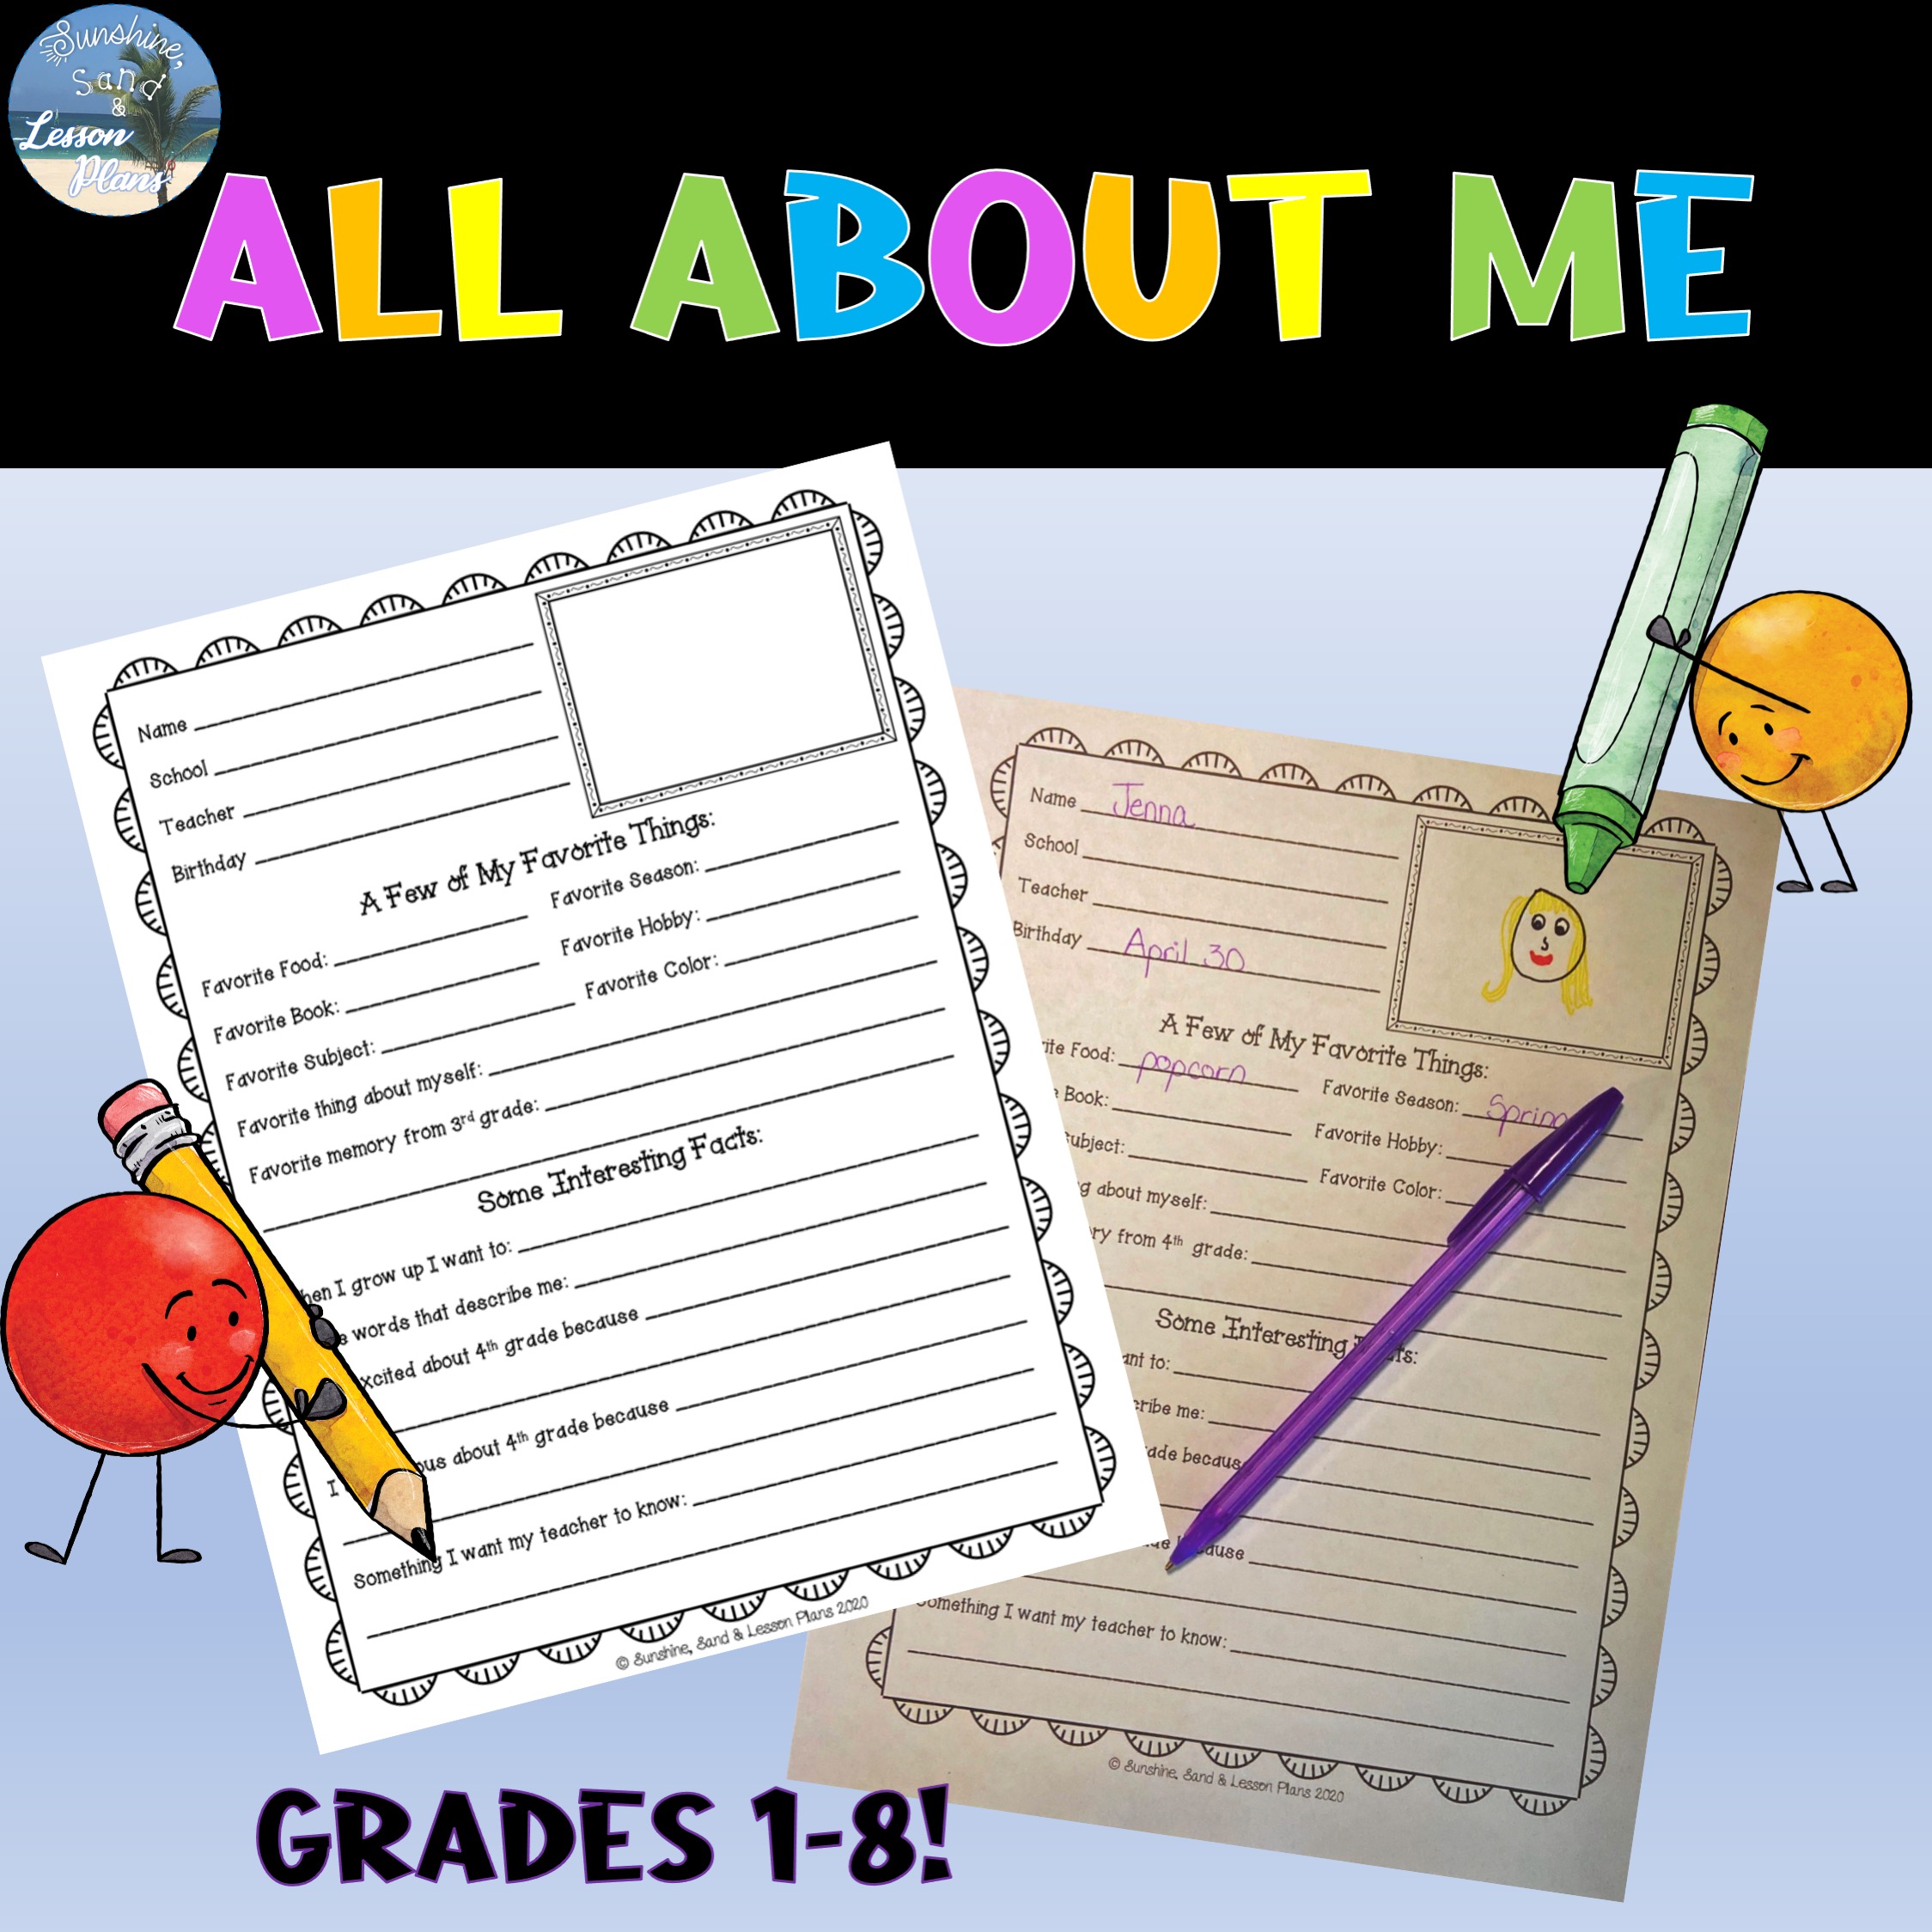 All About Me Activity